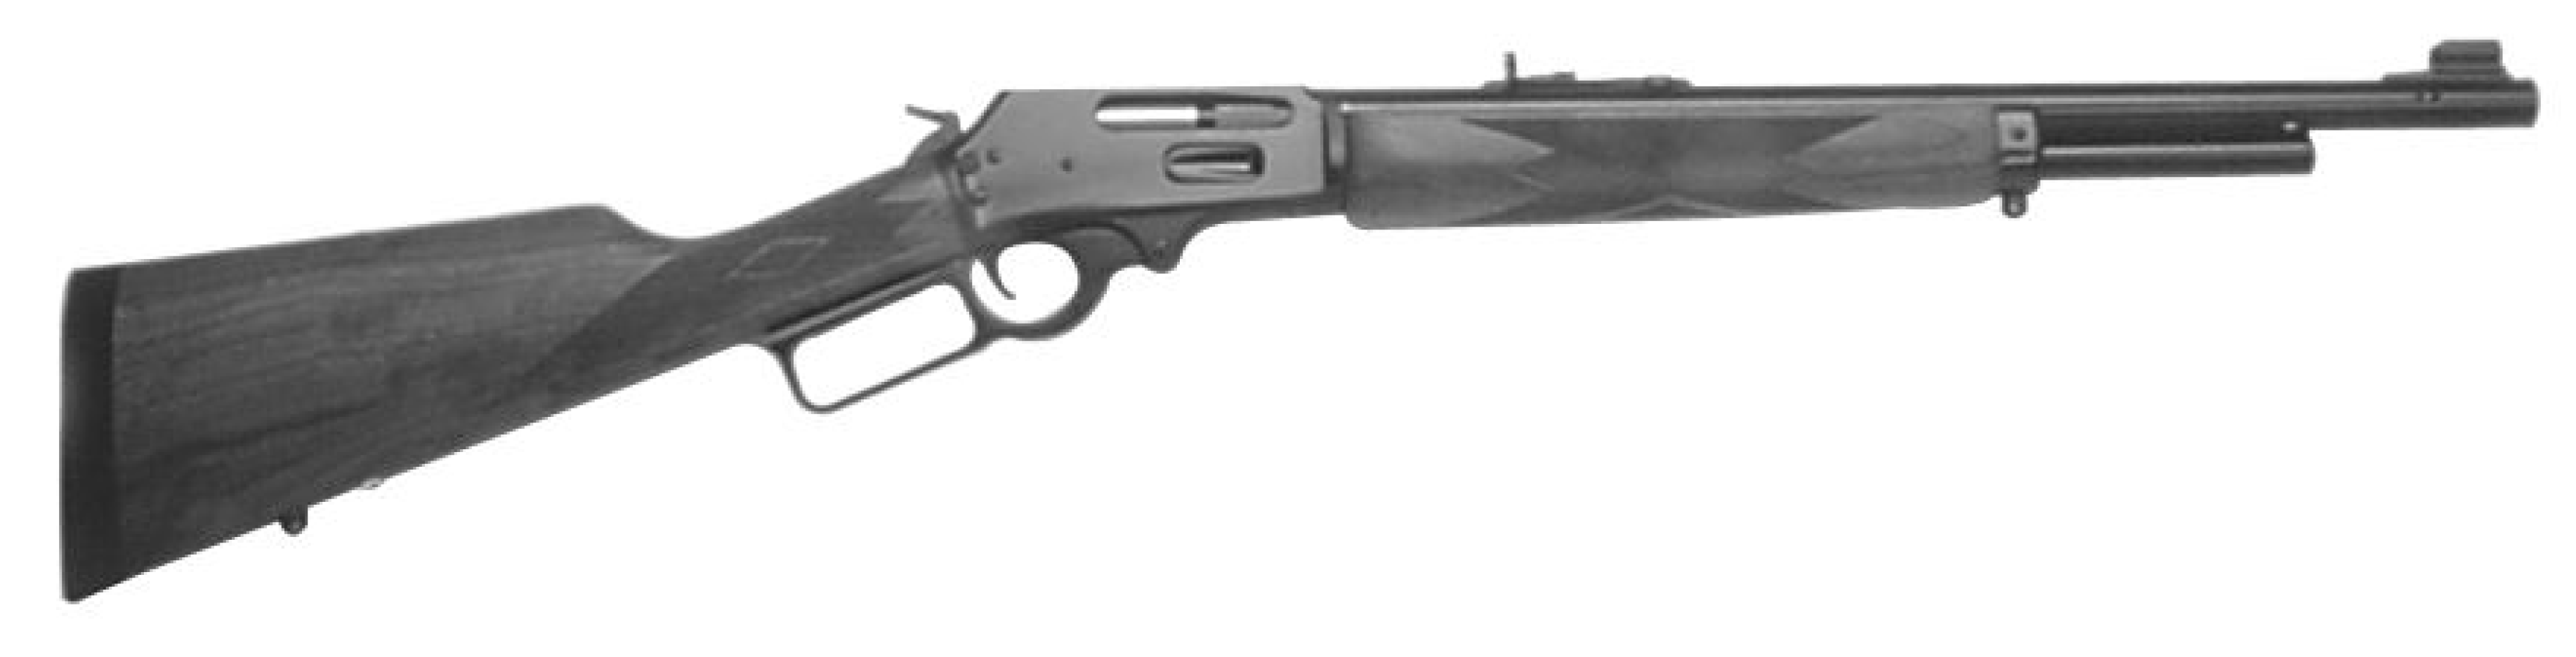 Model 444P Outfitter